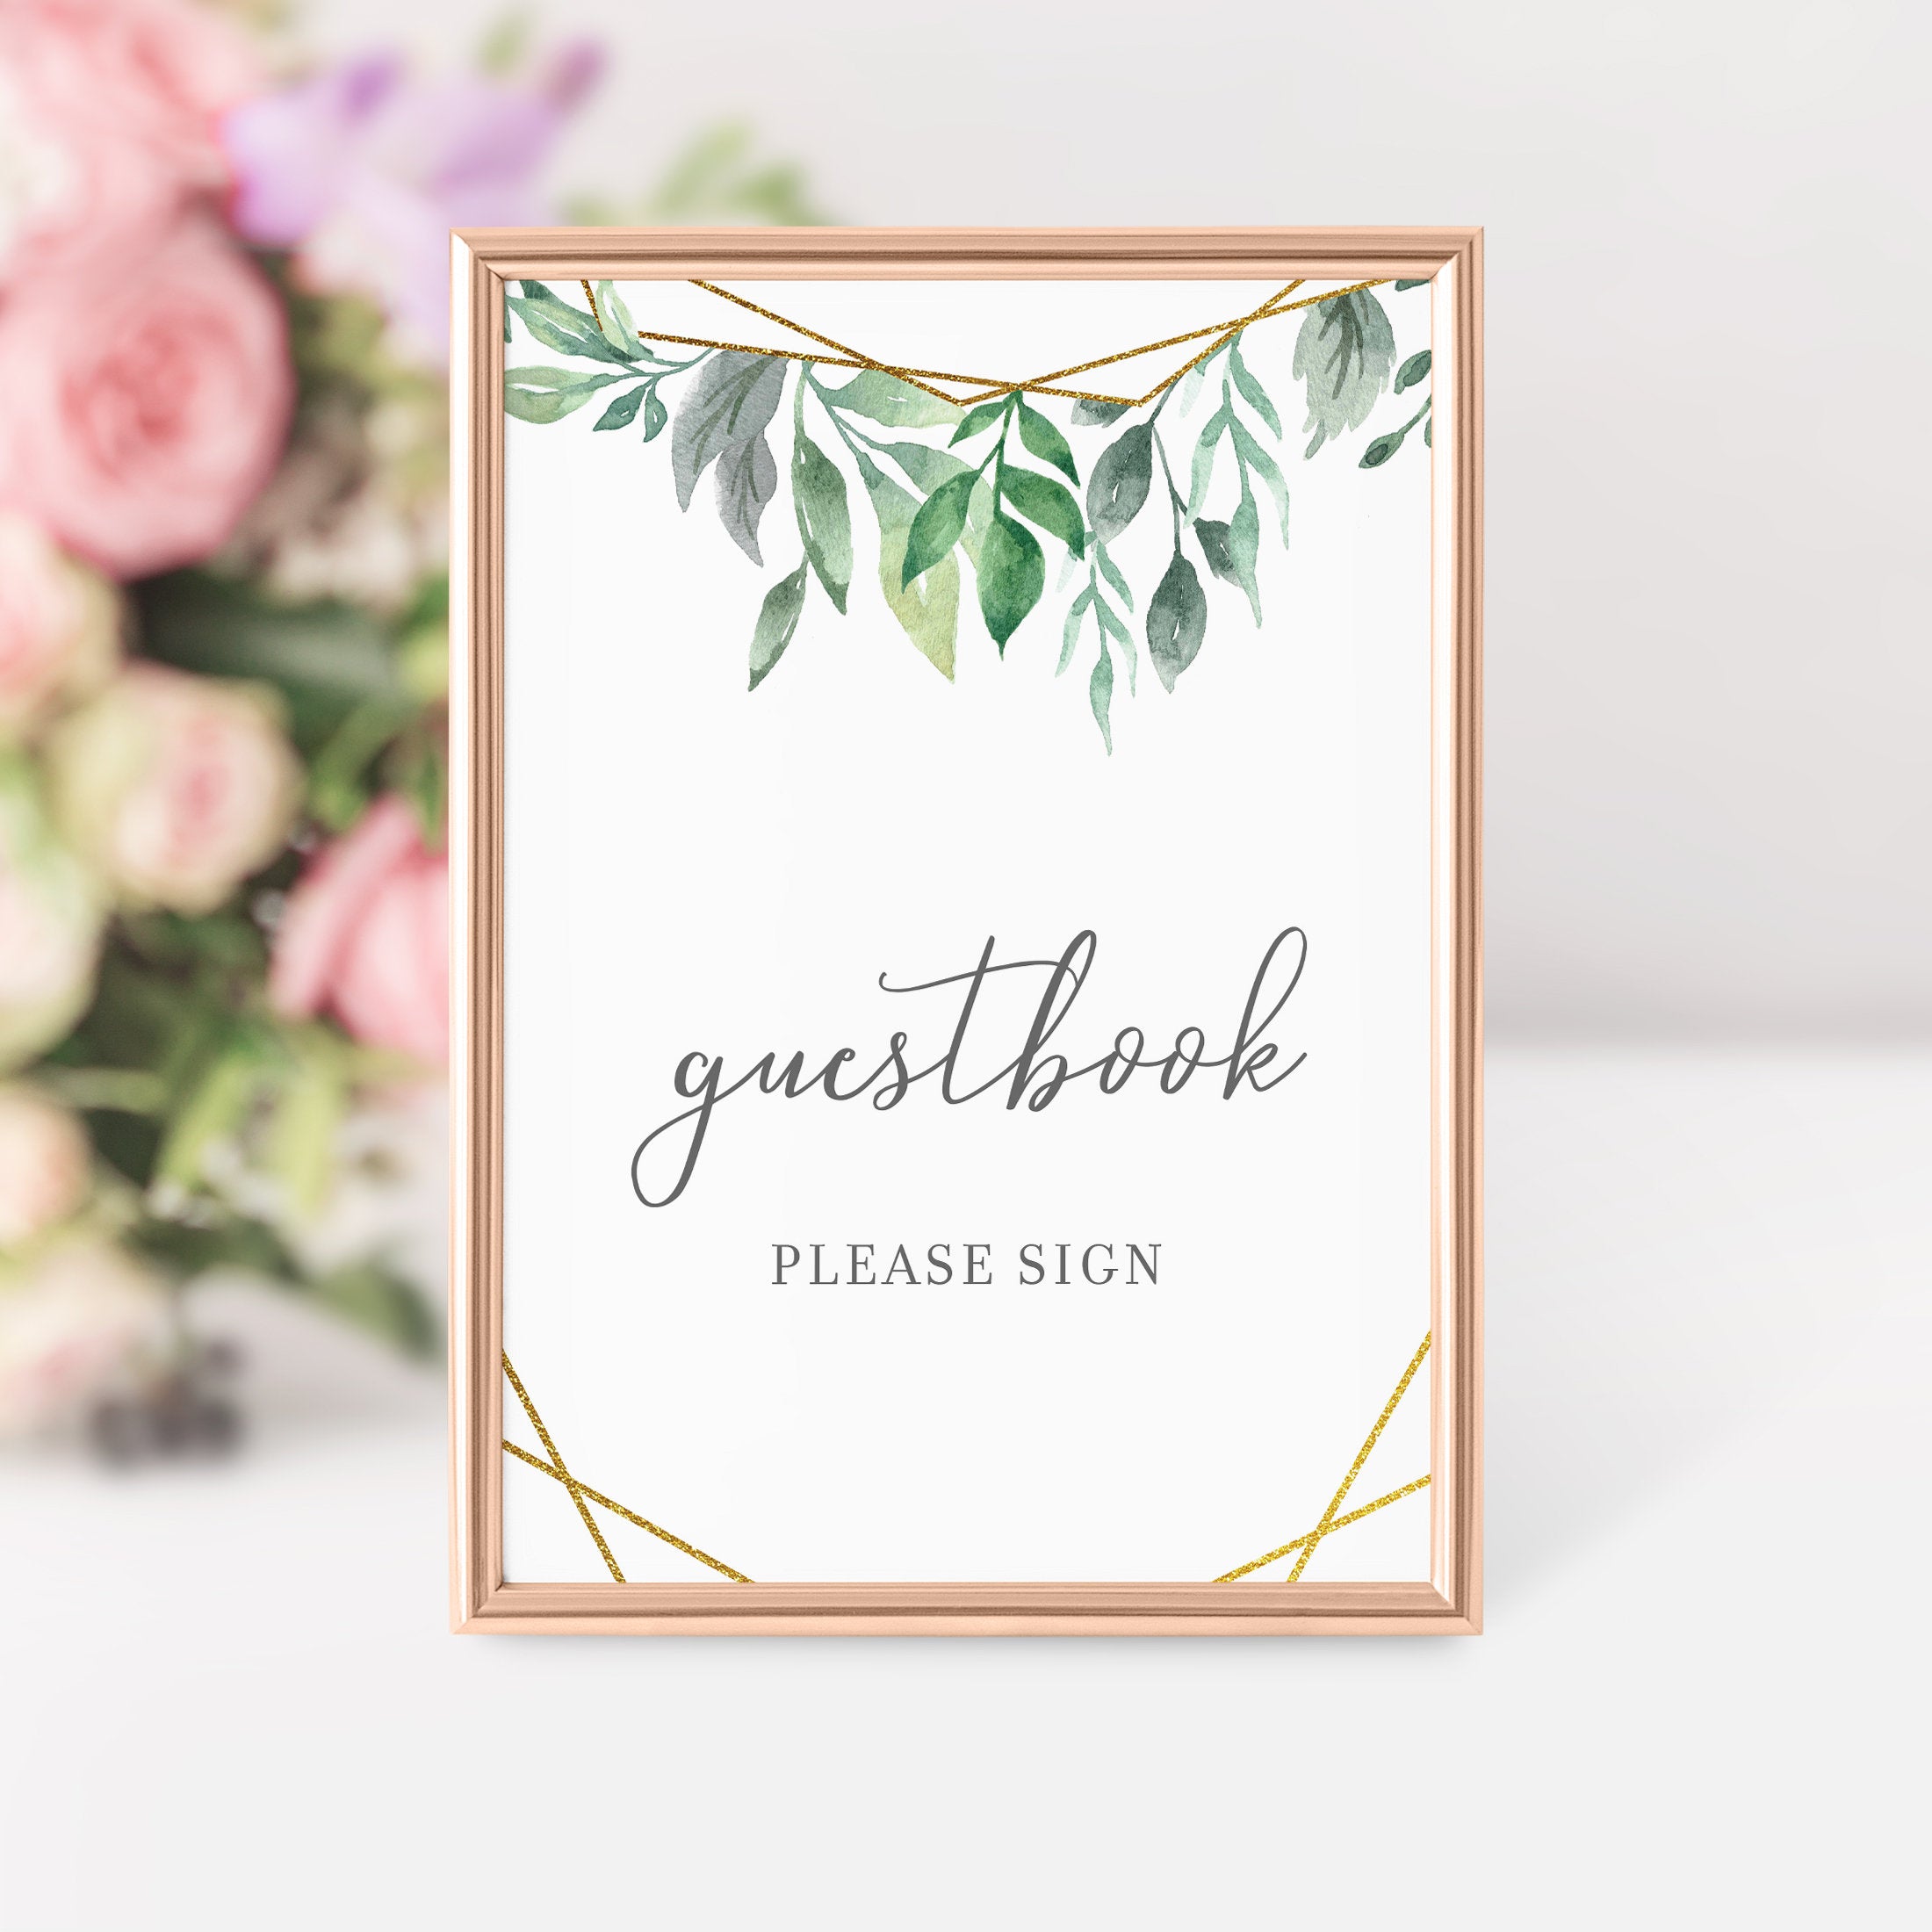 Geometric Gold Greenery Printable Guestbook Sign INSTANT DOWNLOAD, Bridal Shower, Baby Shower, Wedding Decorations and Supplies - GFG100 - @PlumPolkaDot 